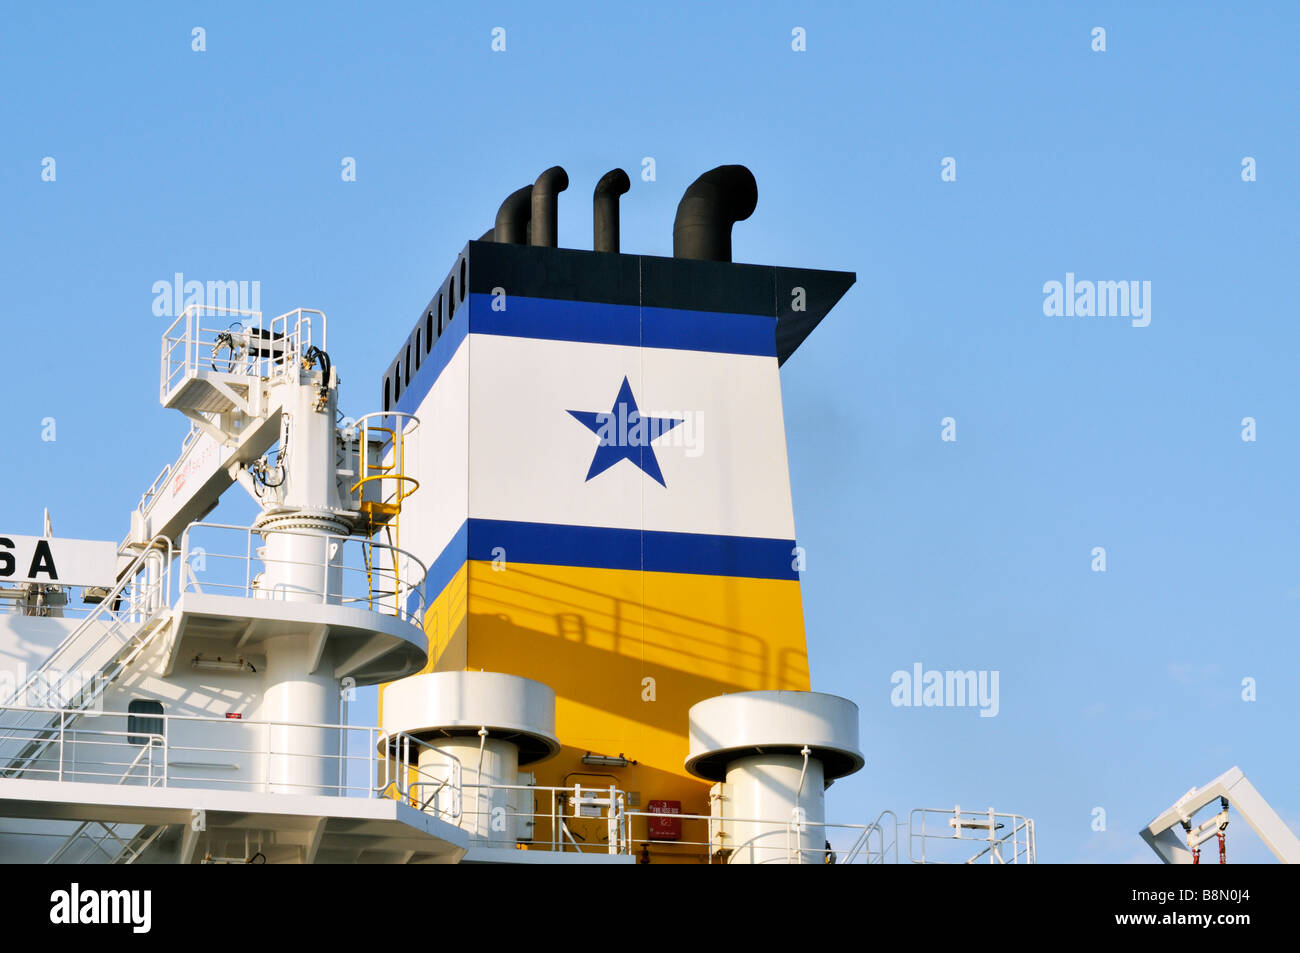 Smokestack on a Greek ship with Greek star emblem against [clear blue sky] Stock Photo